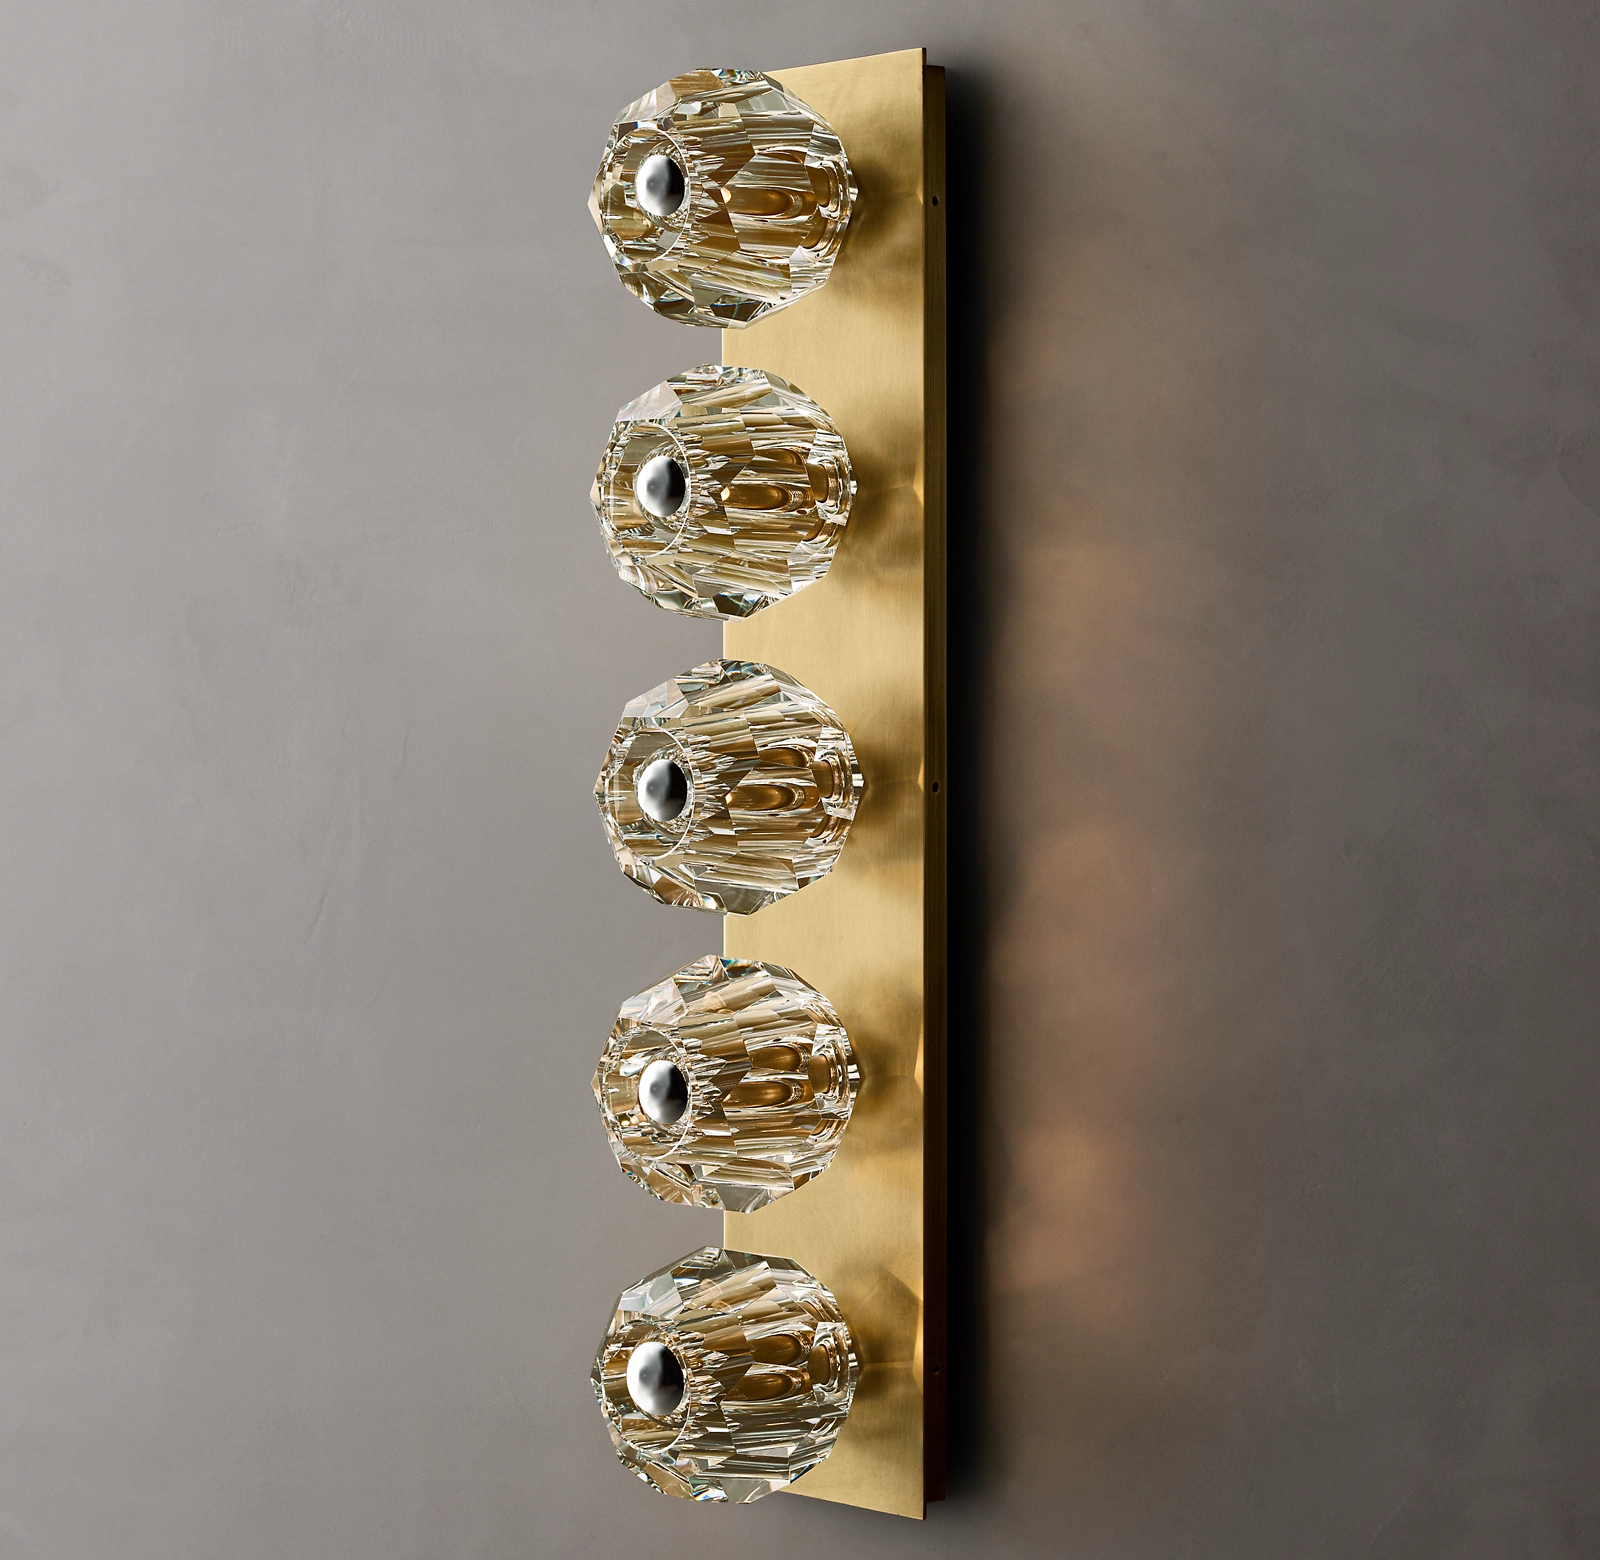 Belle De Crystal Ball Linear Ground Wall Sconce